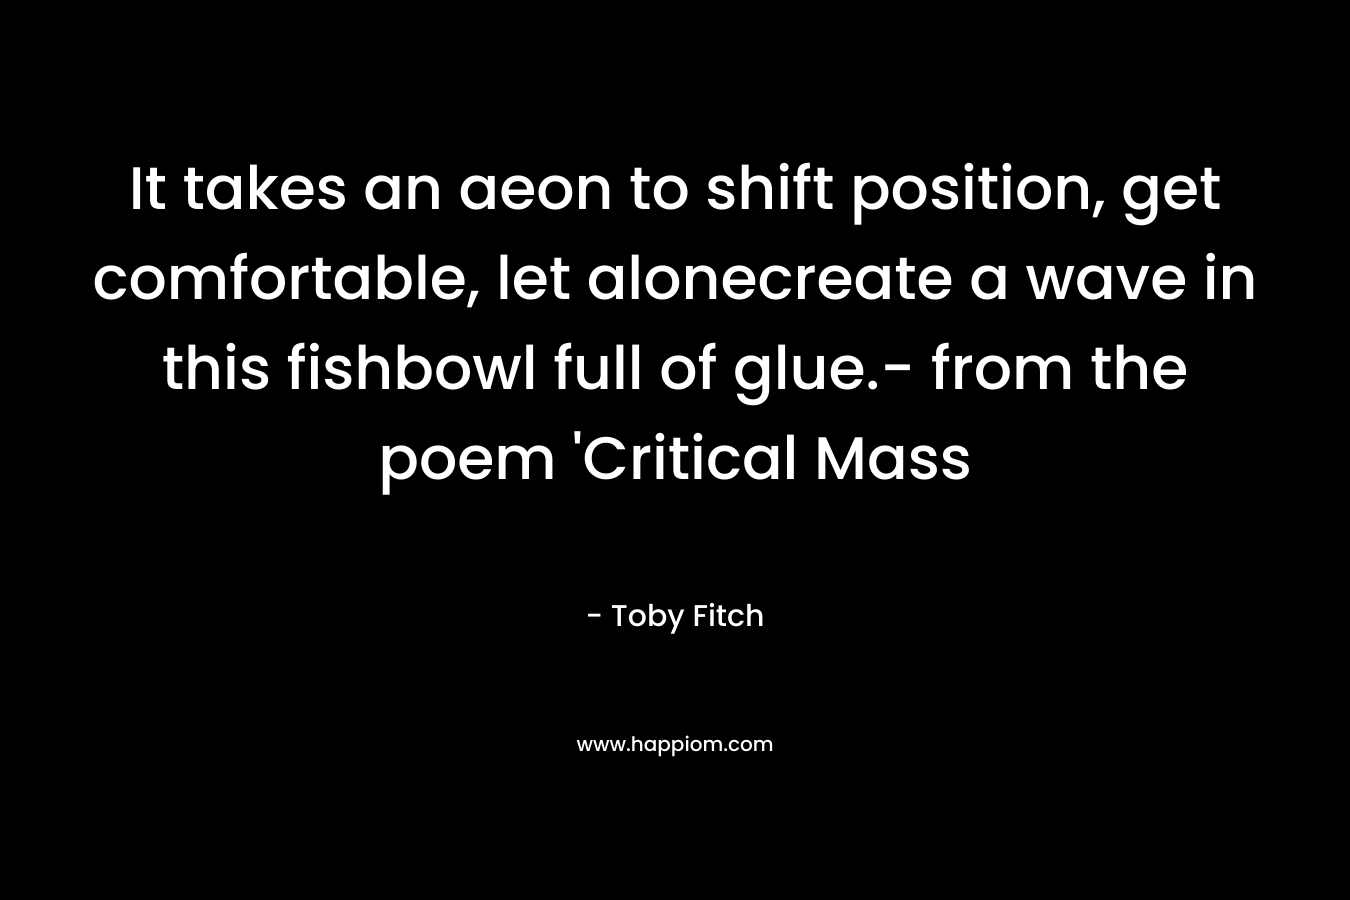 It takes an aeon to shift position, get comfortable, let alonecreate a wave in this fishbowl full of glue.- from the poem 'Critical Mass